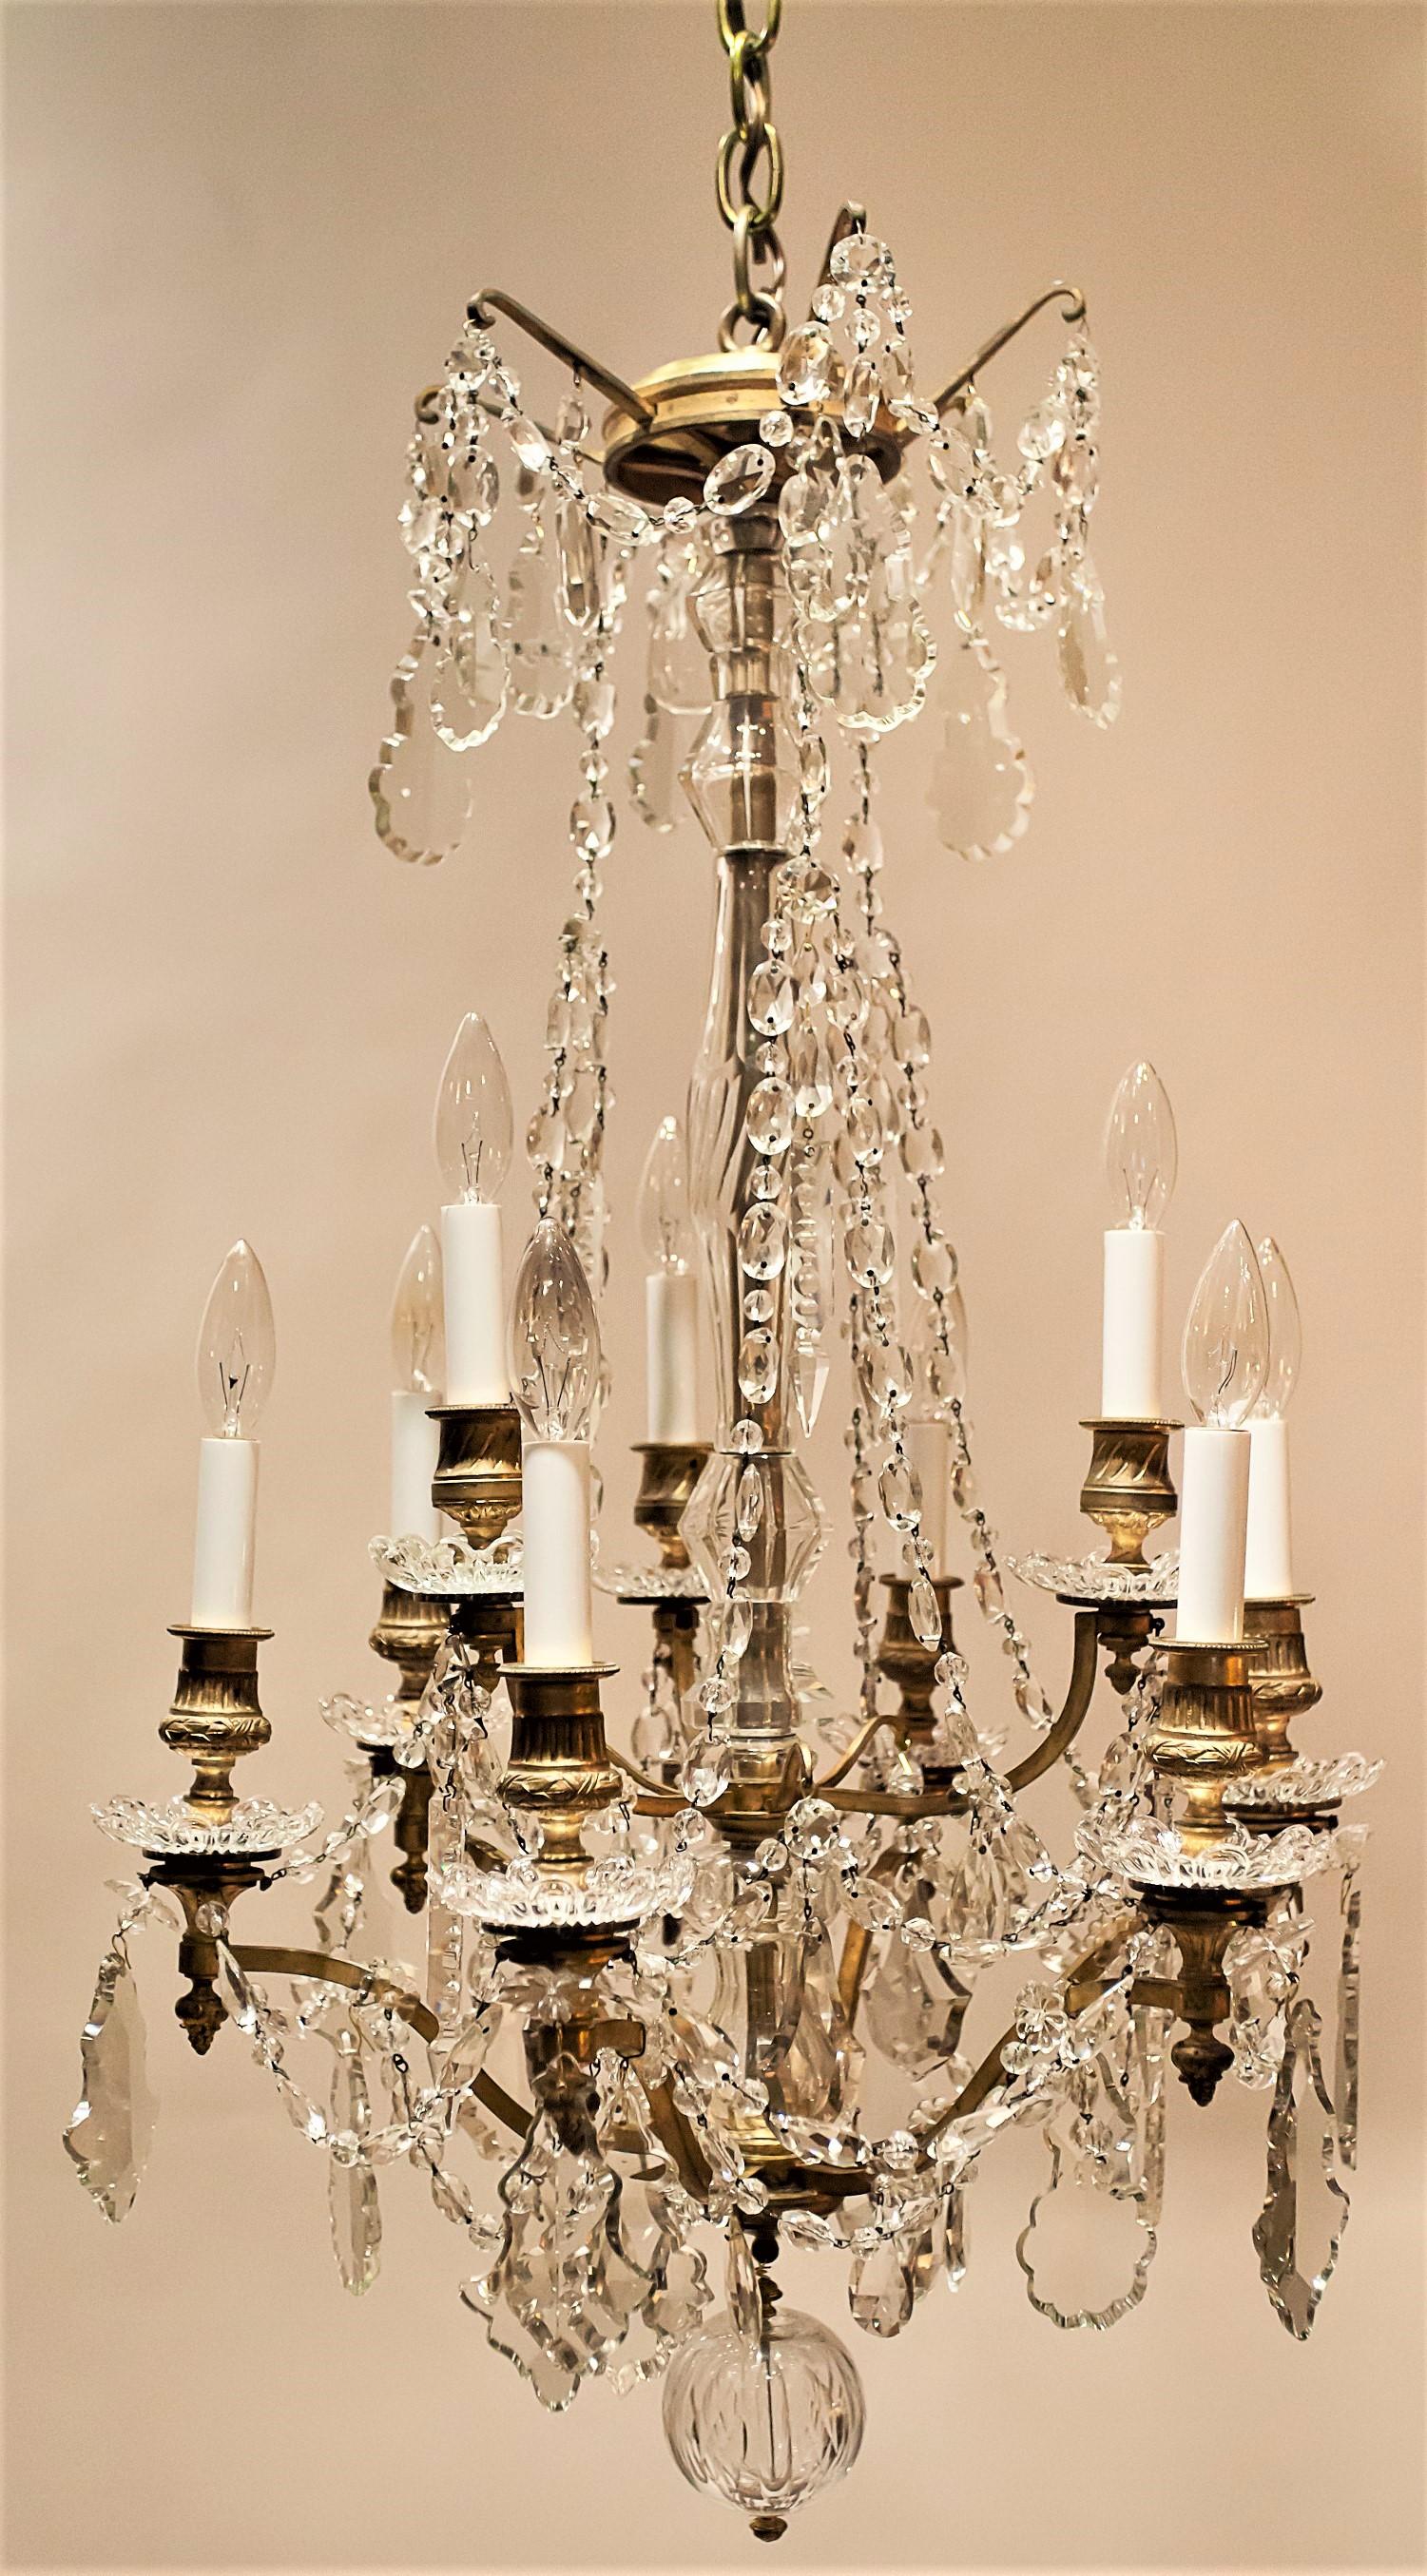 This excellent copy of an 18th century Rococo chandelier has a hand-cast gilt brass frame and handcut lead crystal prisms. The stem is hand blown and cut glass. The crystal trim includes florets, coffins, rosettes, ovals, pears and tear drops.